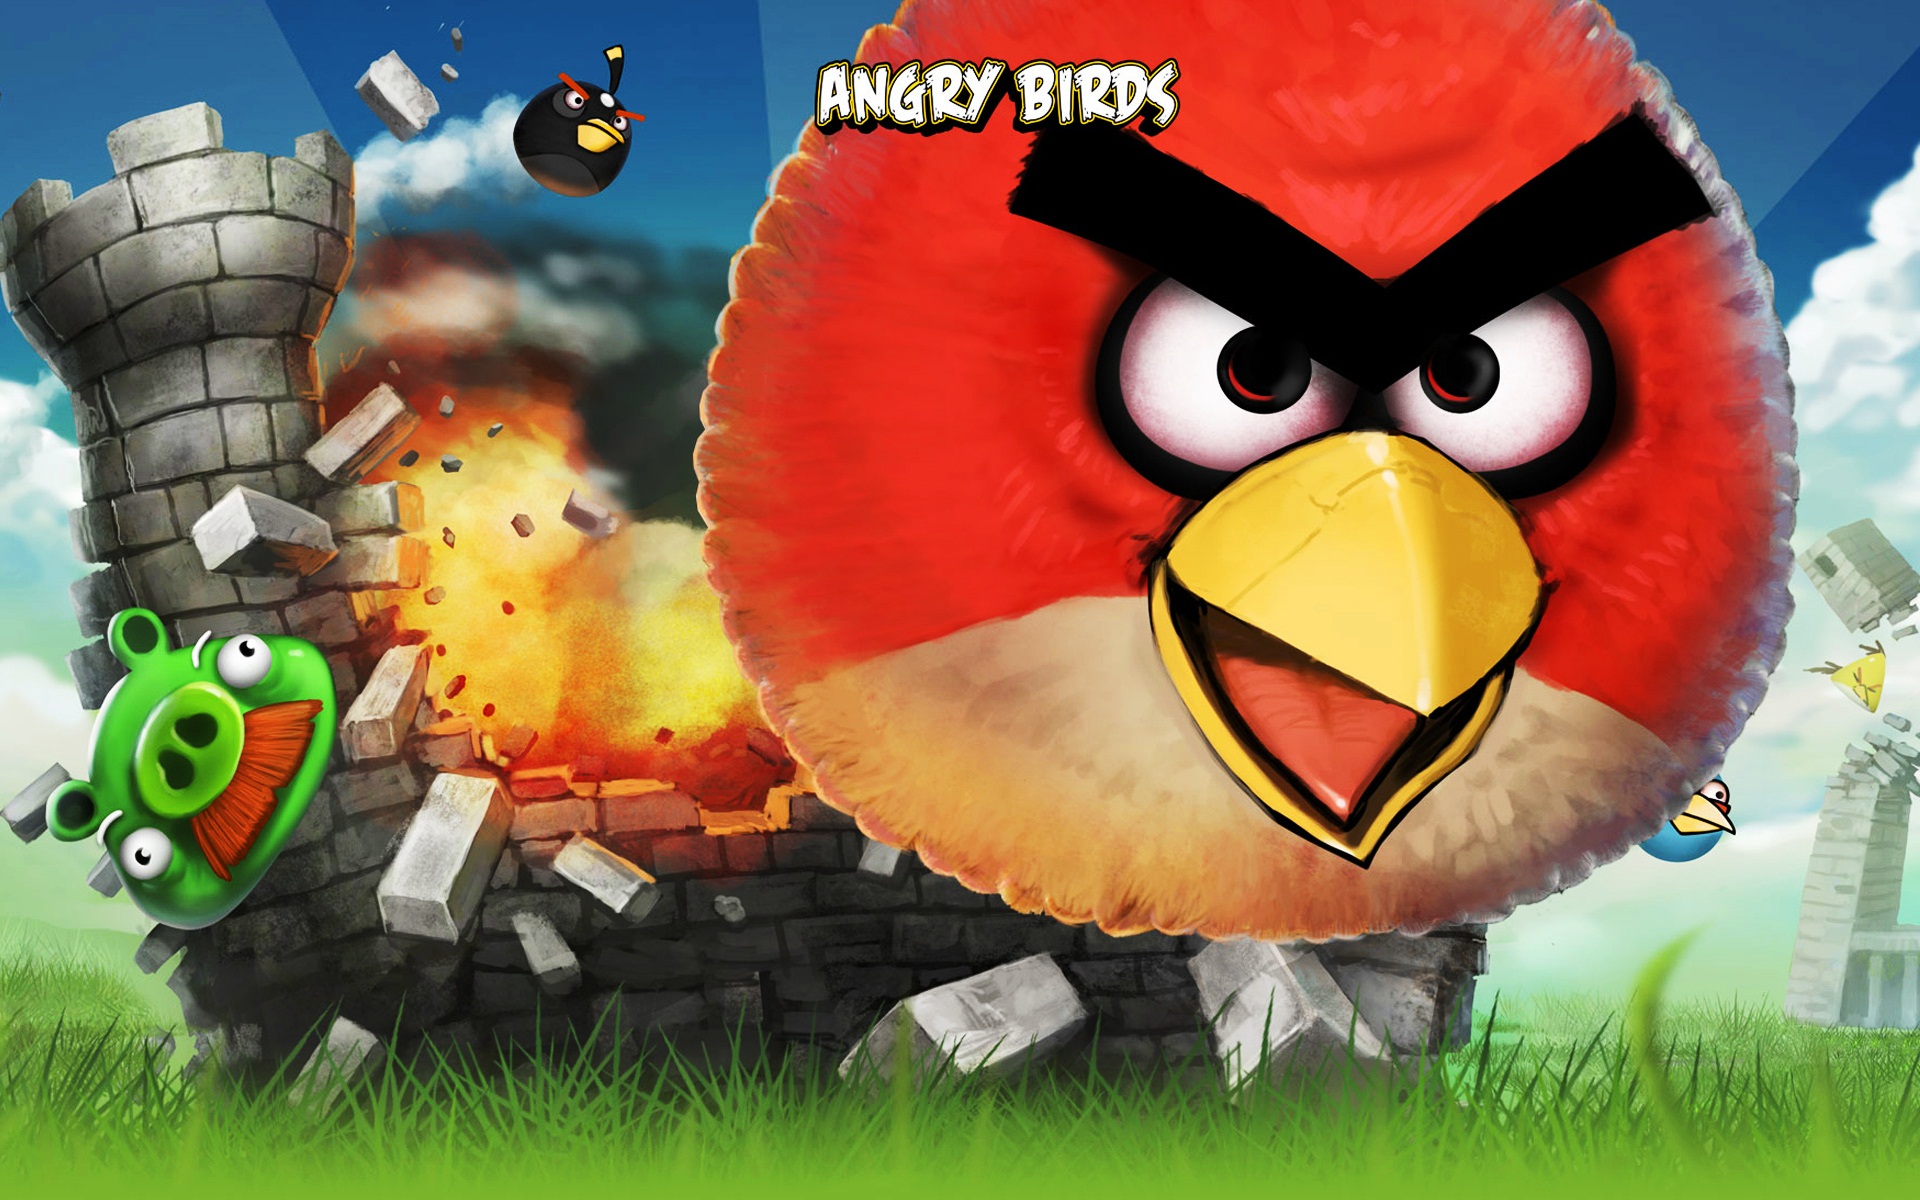 Angry birds picture for iPhone gaming